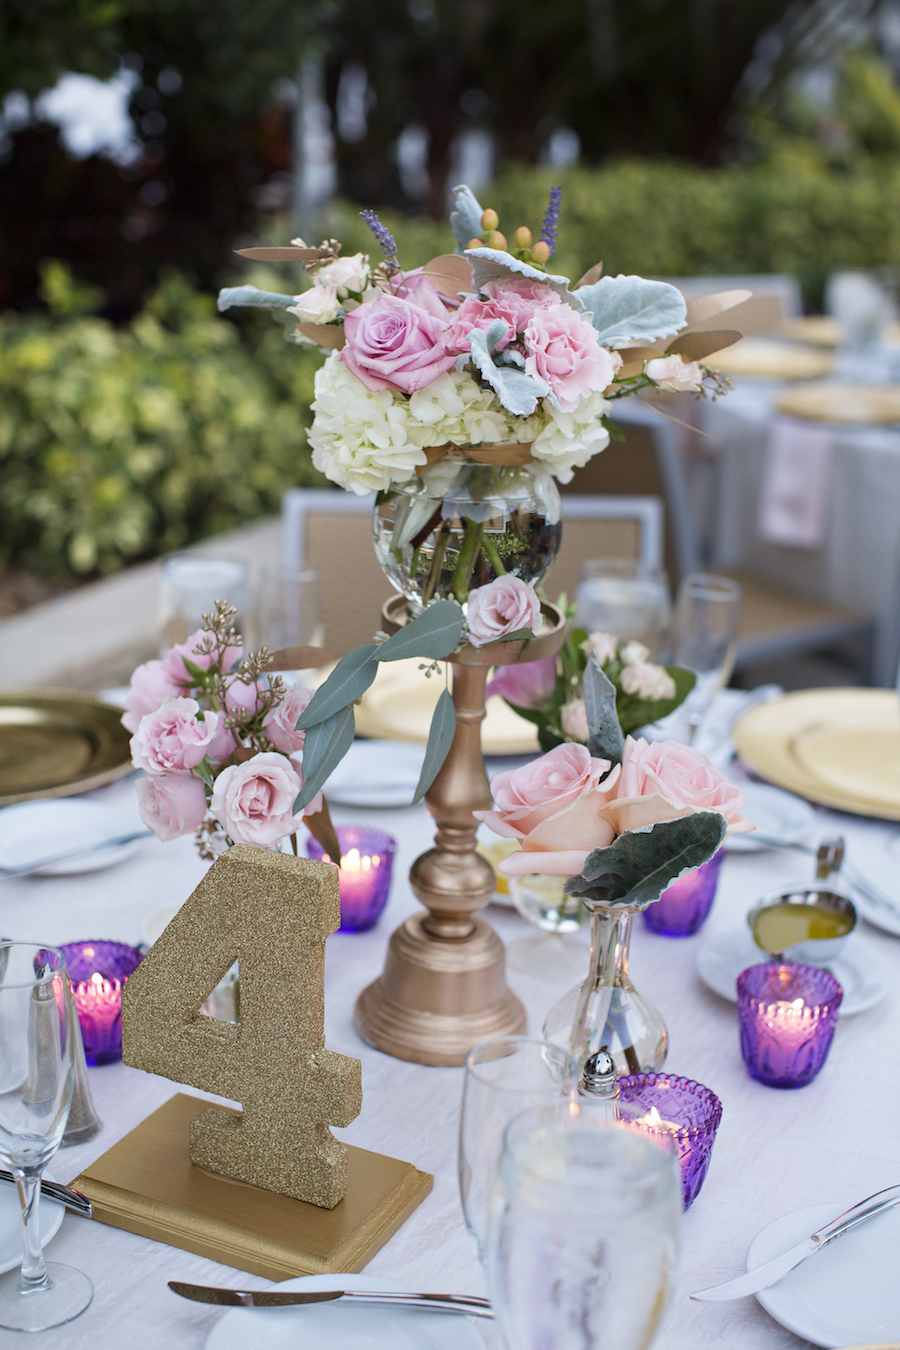 Romantic, Outdoor, Sarasota, Florida Wedding Reception Table Decor with Purple Tealight Holders, Gold Glitter Table Number and White and Pink Floral Centerpieces